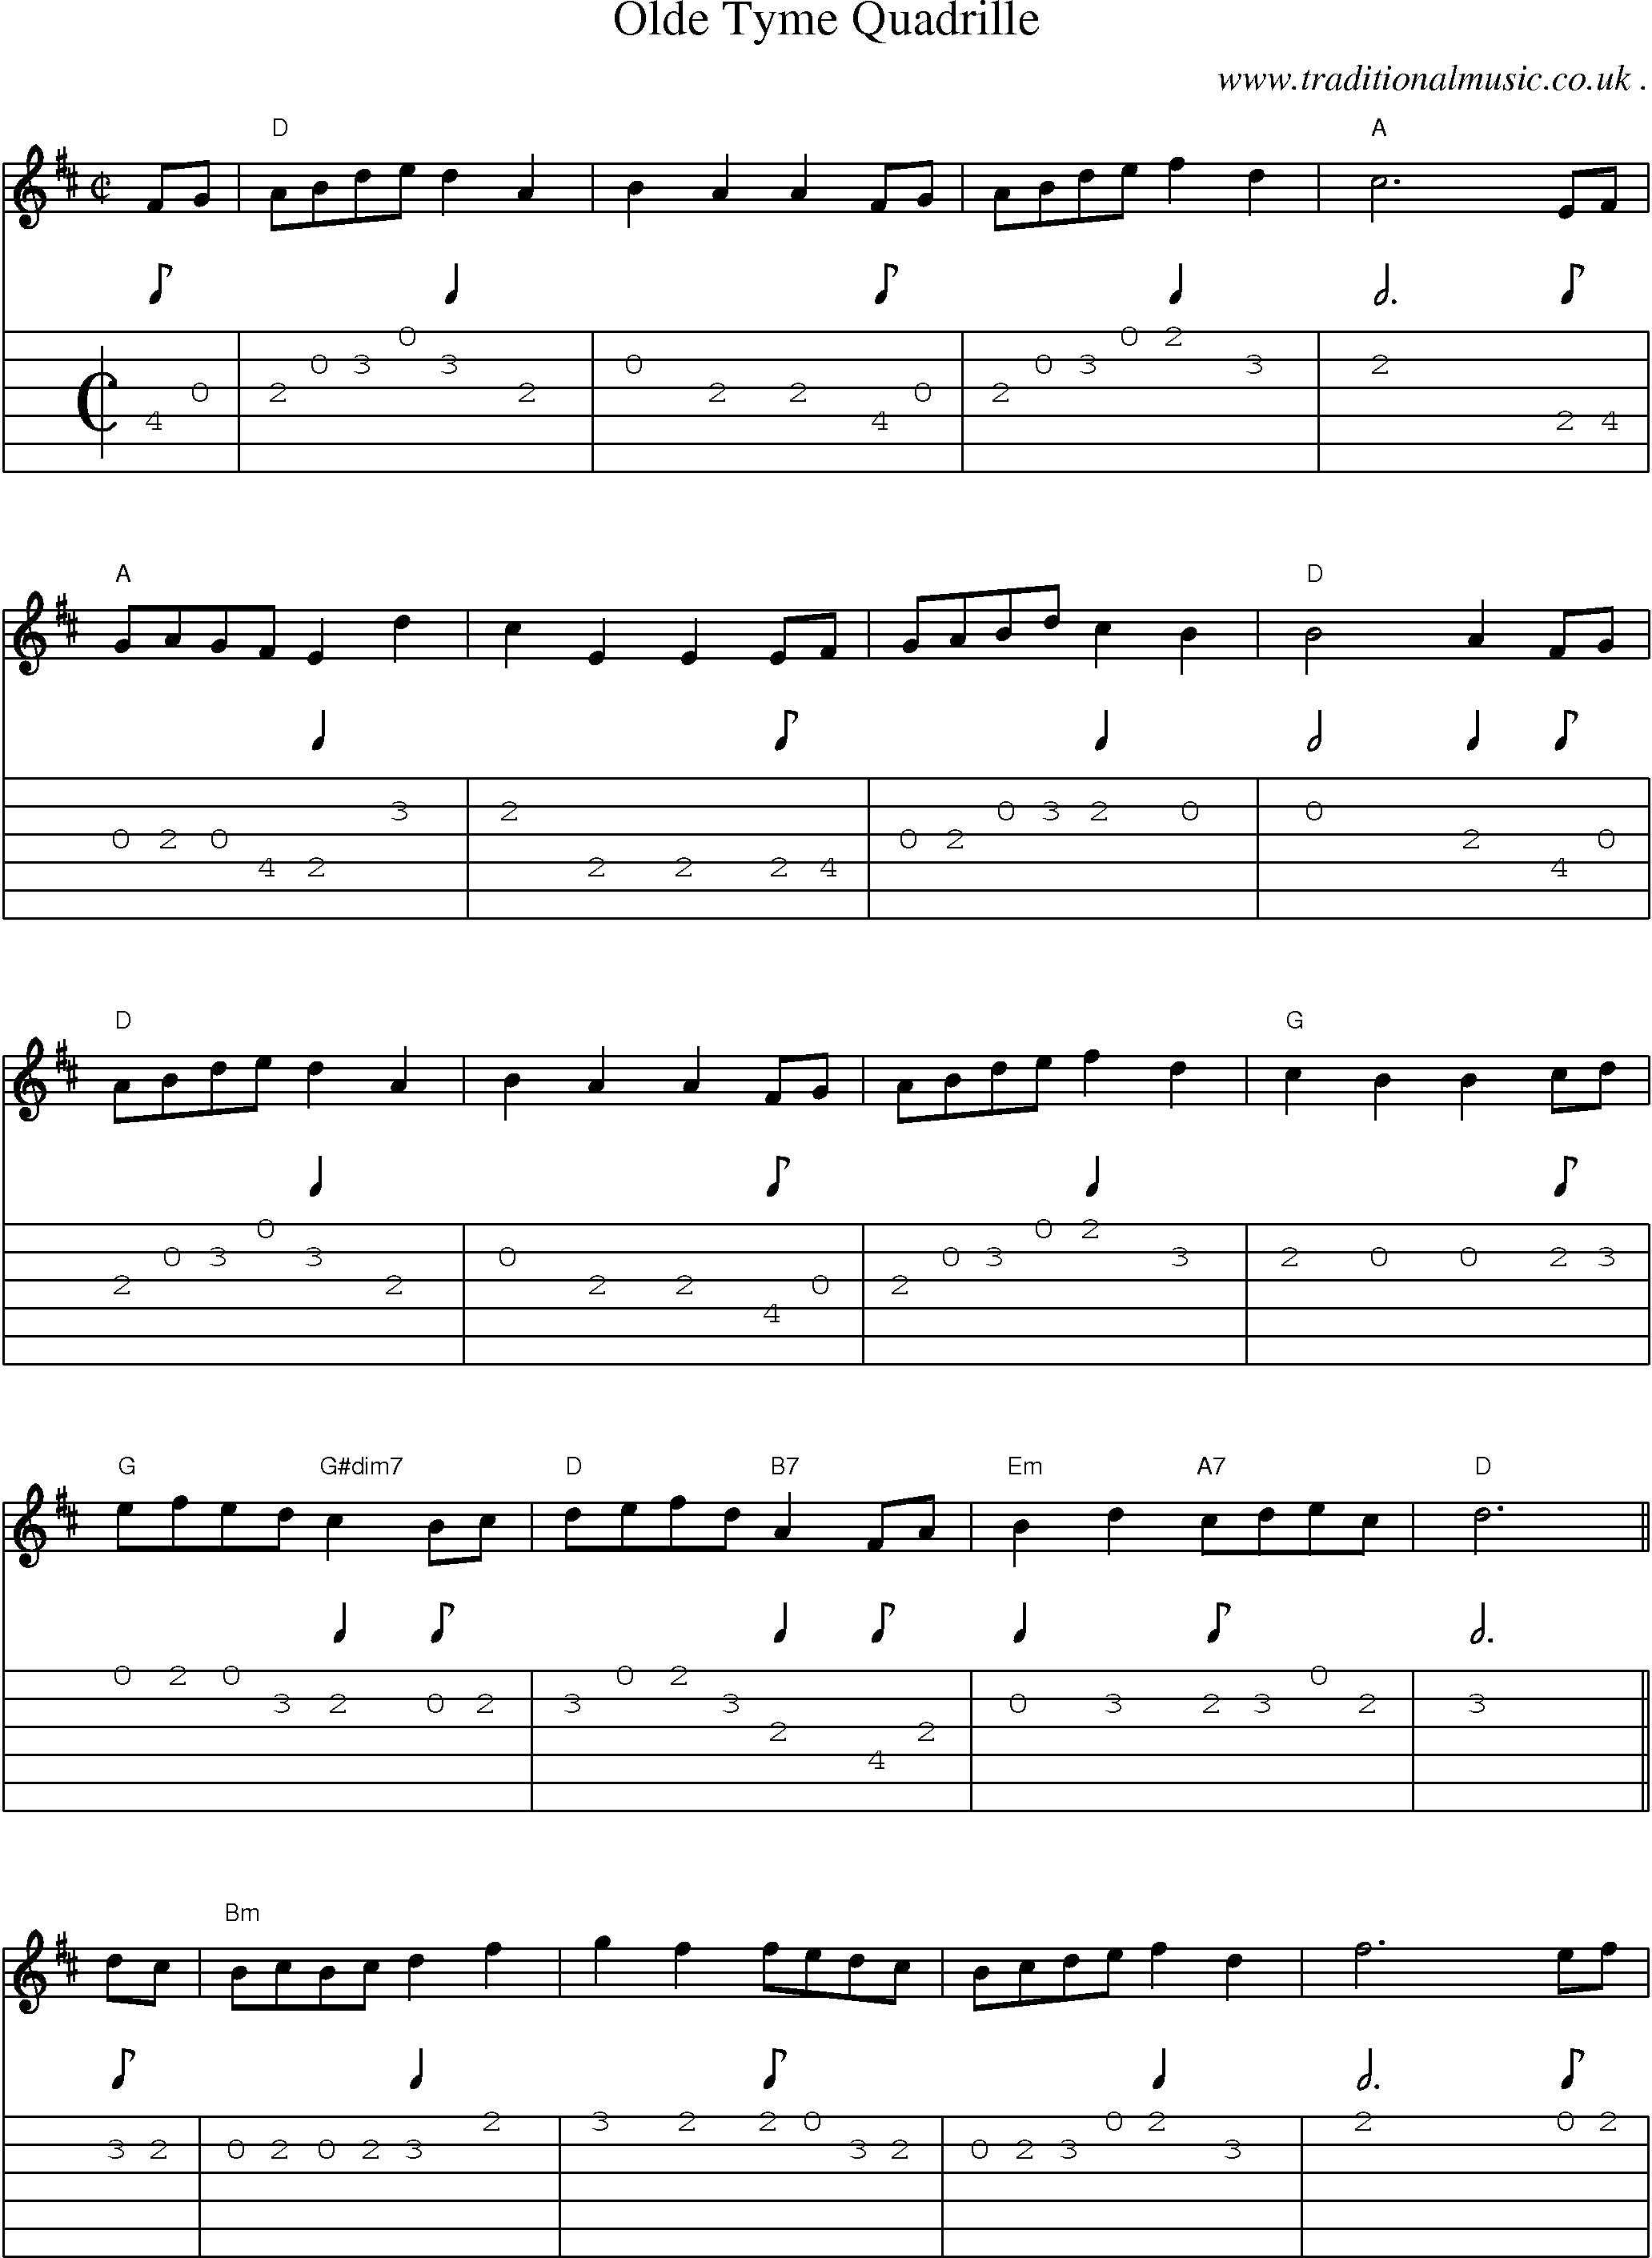 Music Score and Guitar Tabs for Olde Tyme Quadrille